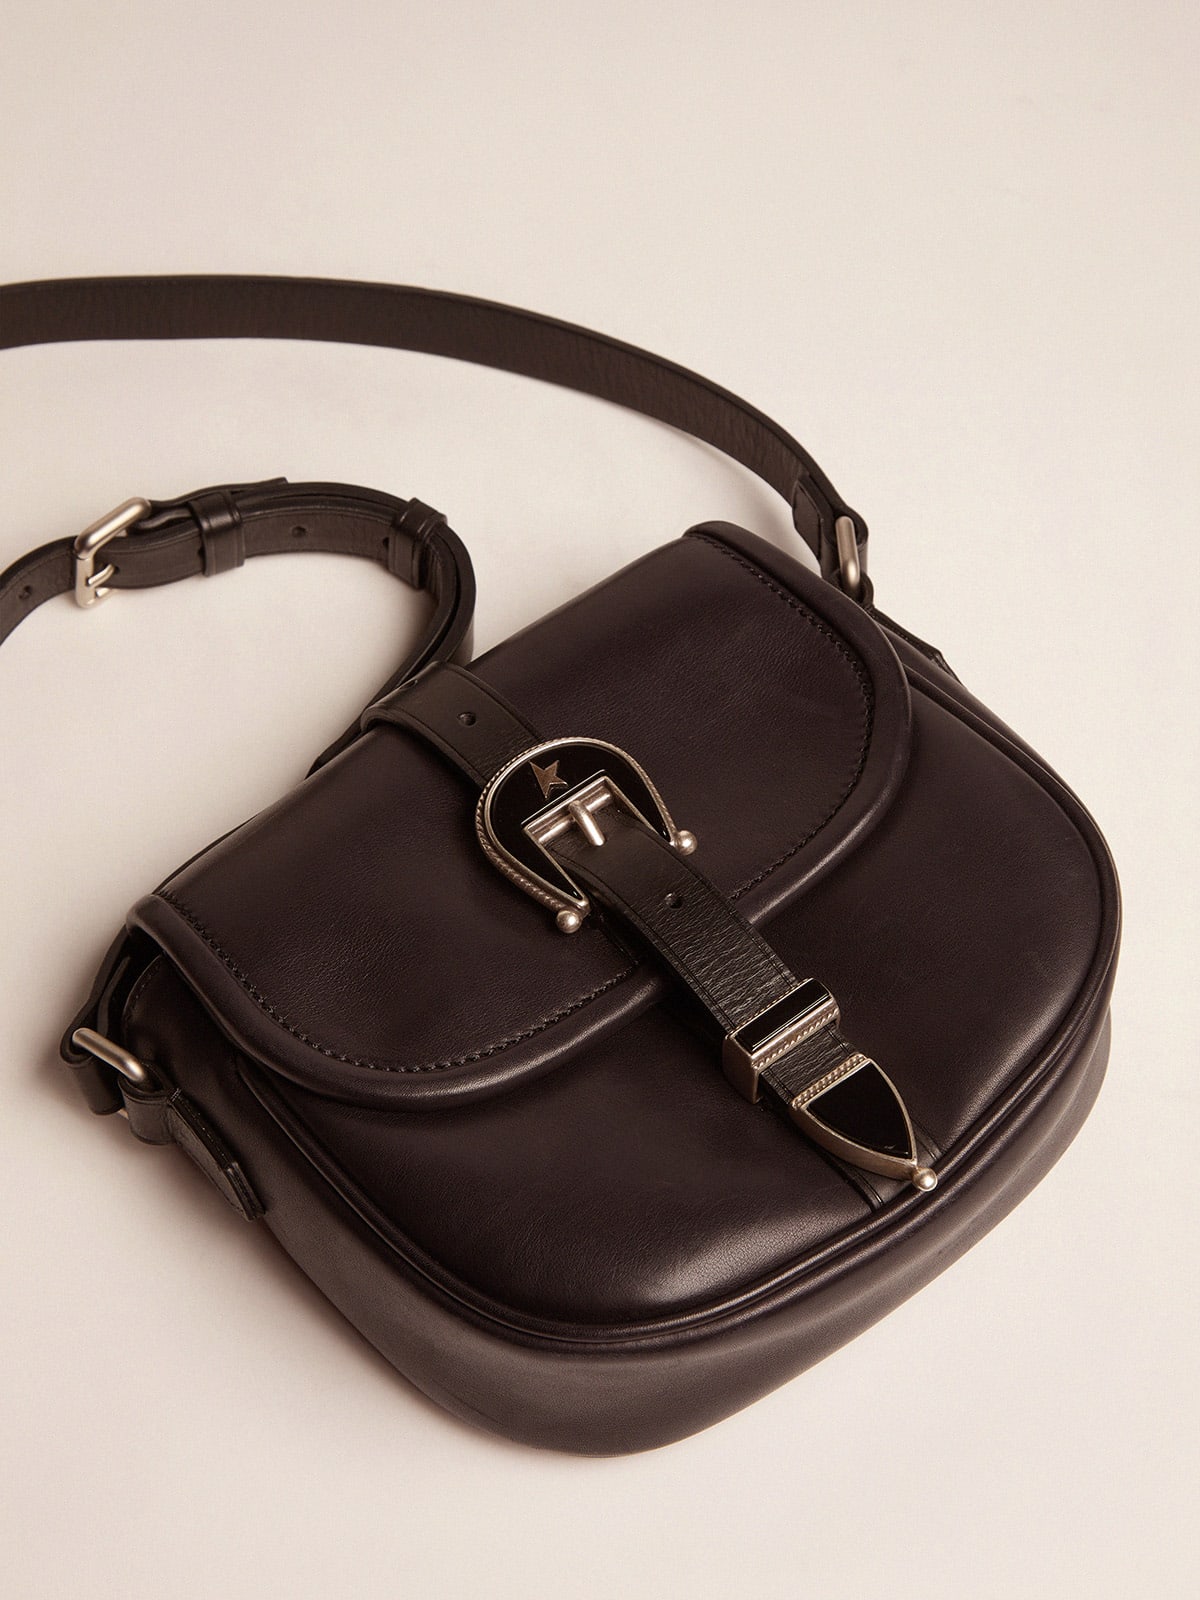 Golden Goose - Women's small Rodeo Bag in black leather in 